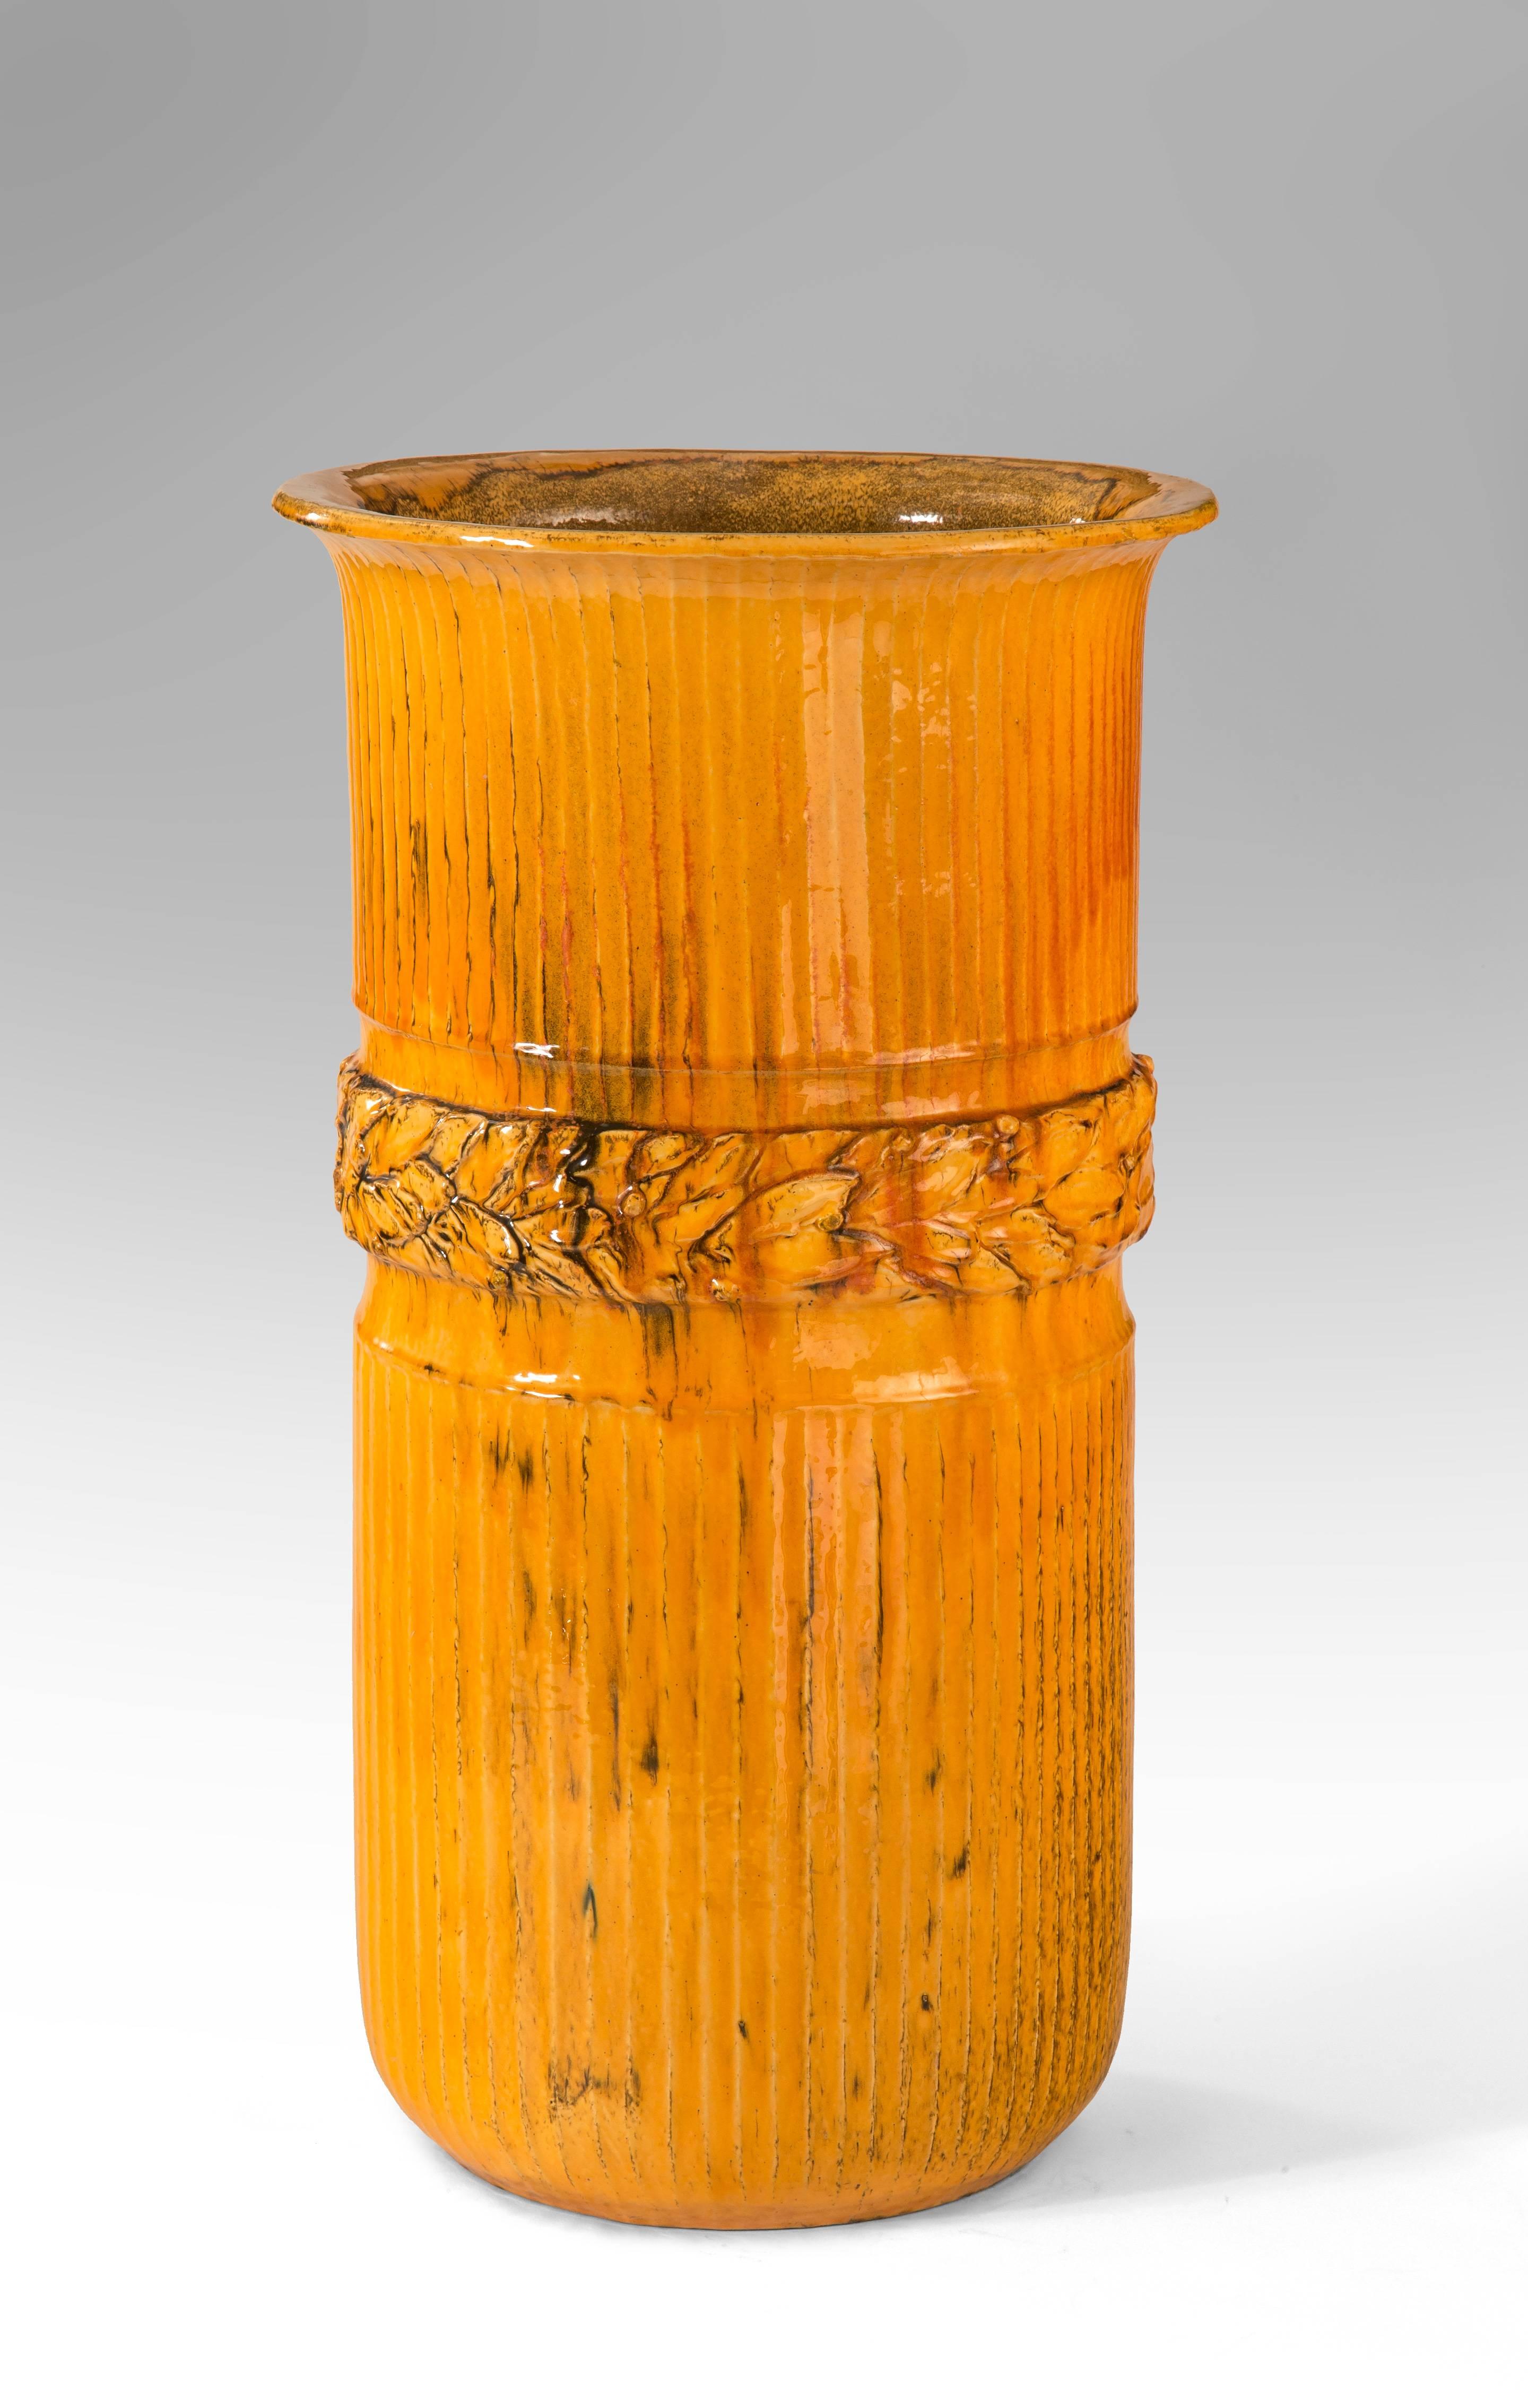 An exceptional rich glaze and scale, one the best examples we have seen. The fluted cylindrical body banded by a laurel wreath. Signed: HAK Danmark

A related vase by Hammershøi is illustrated by Peder Rasmussen, Kählers Værk, Denmark, 2002, p. 147